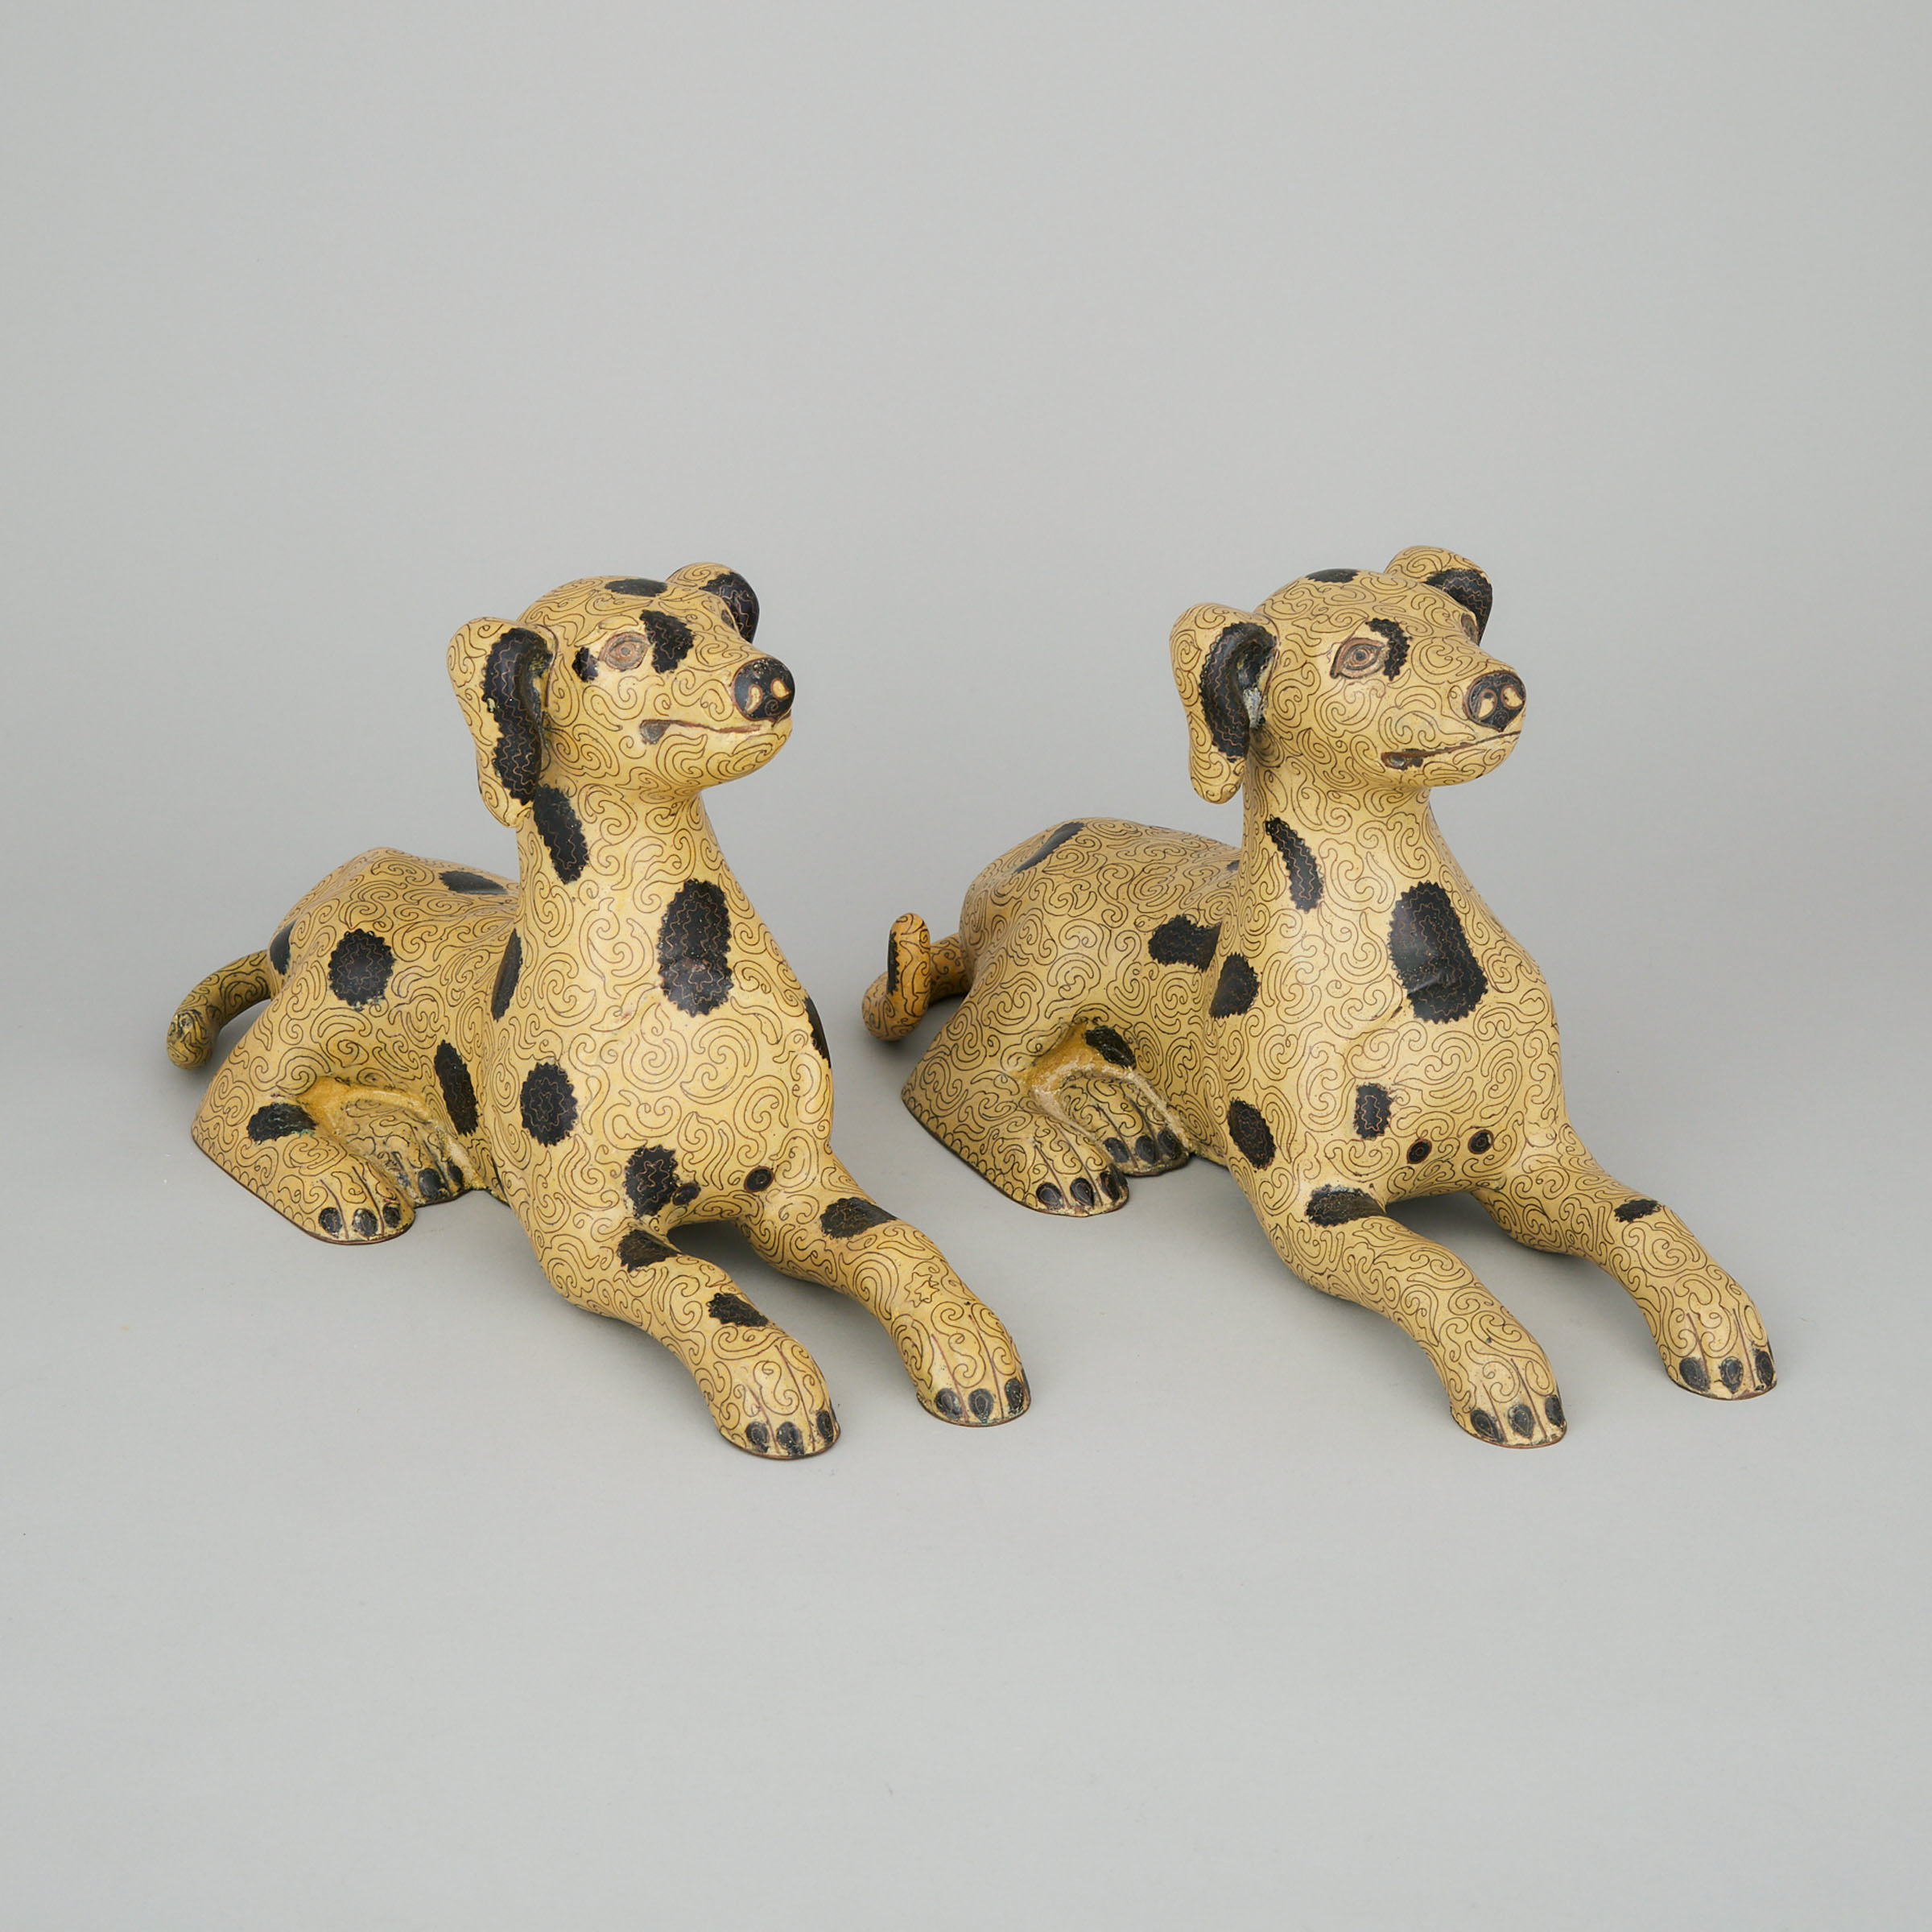 Pair of Chinese Cloisonné Dalmatian Dogs, mid 20th century